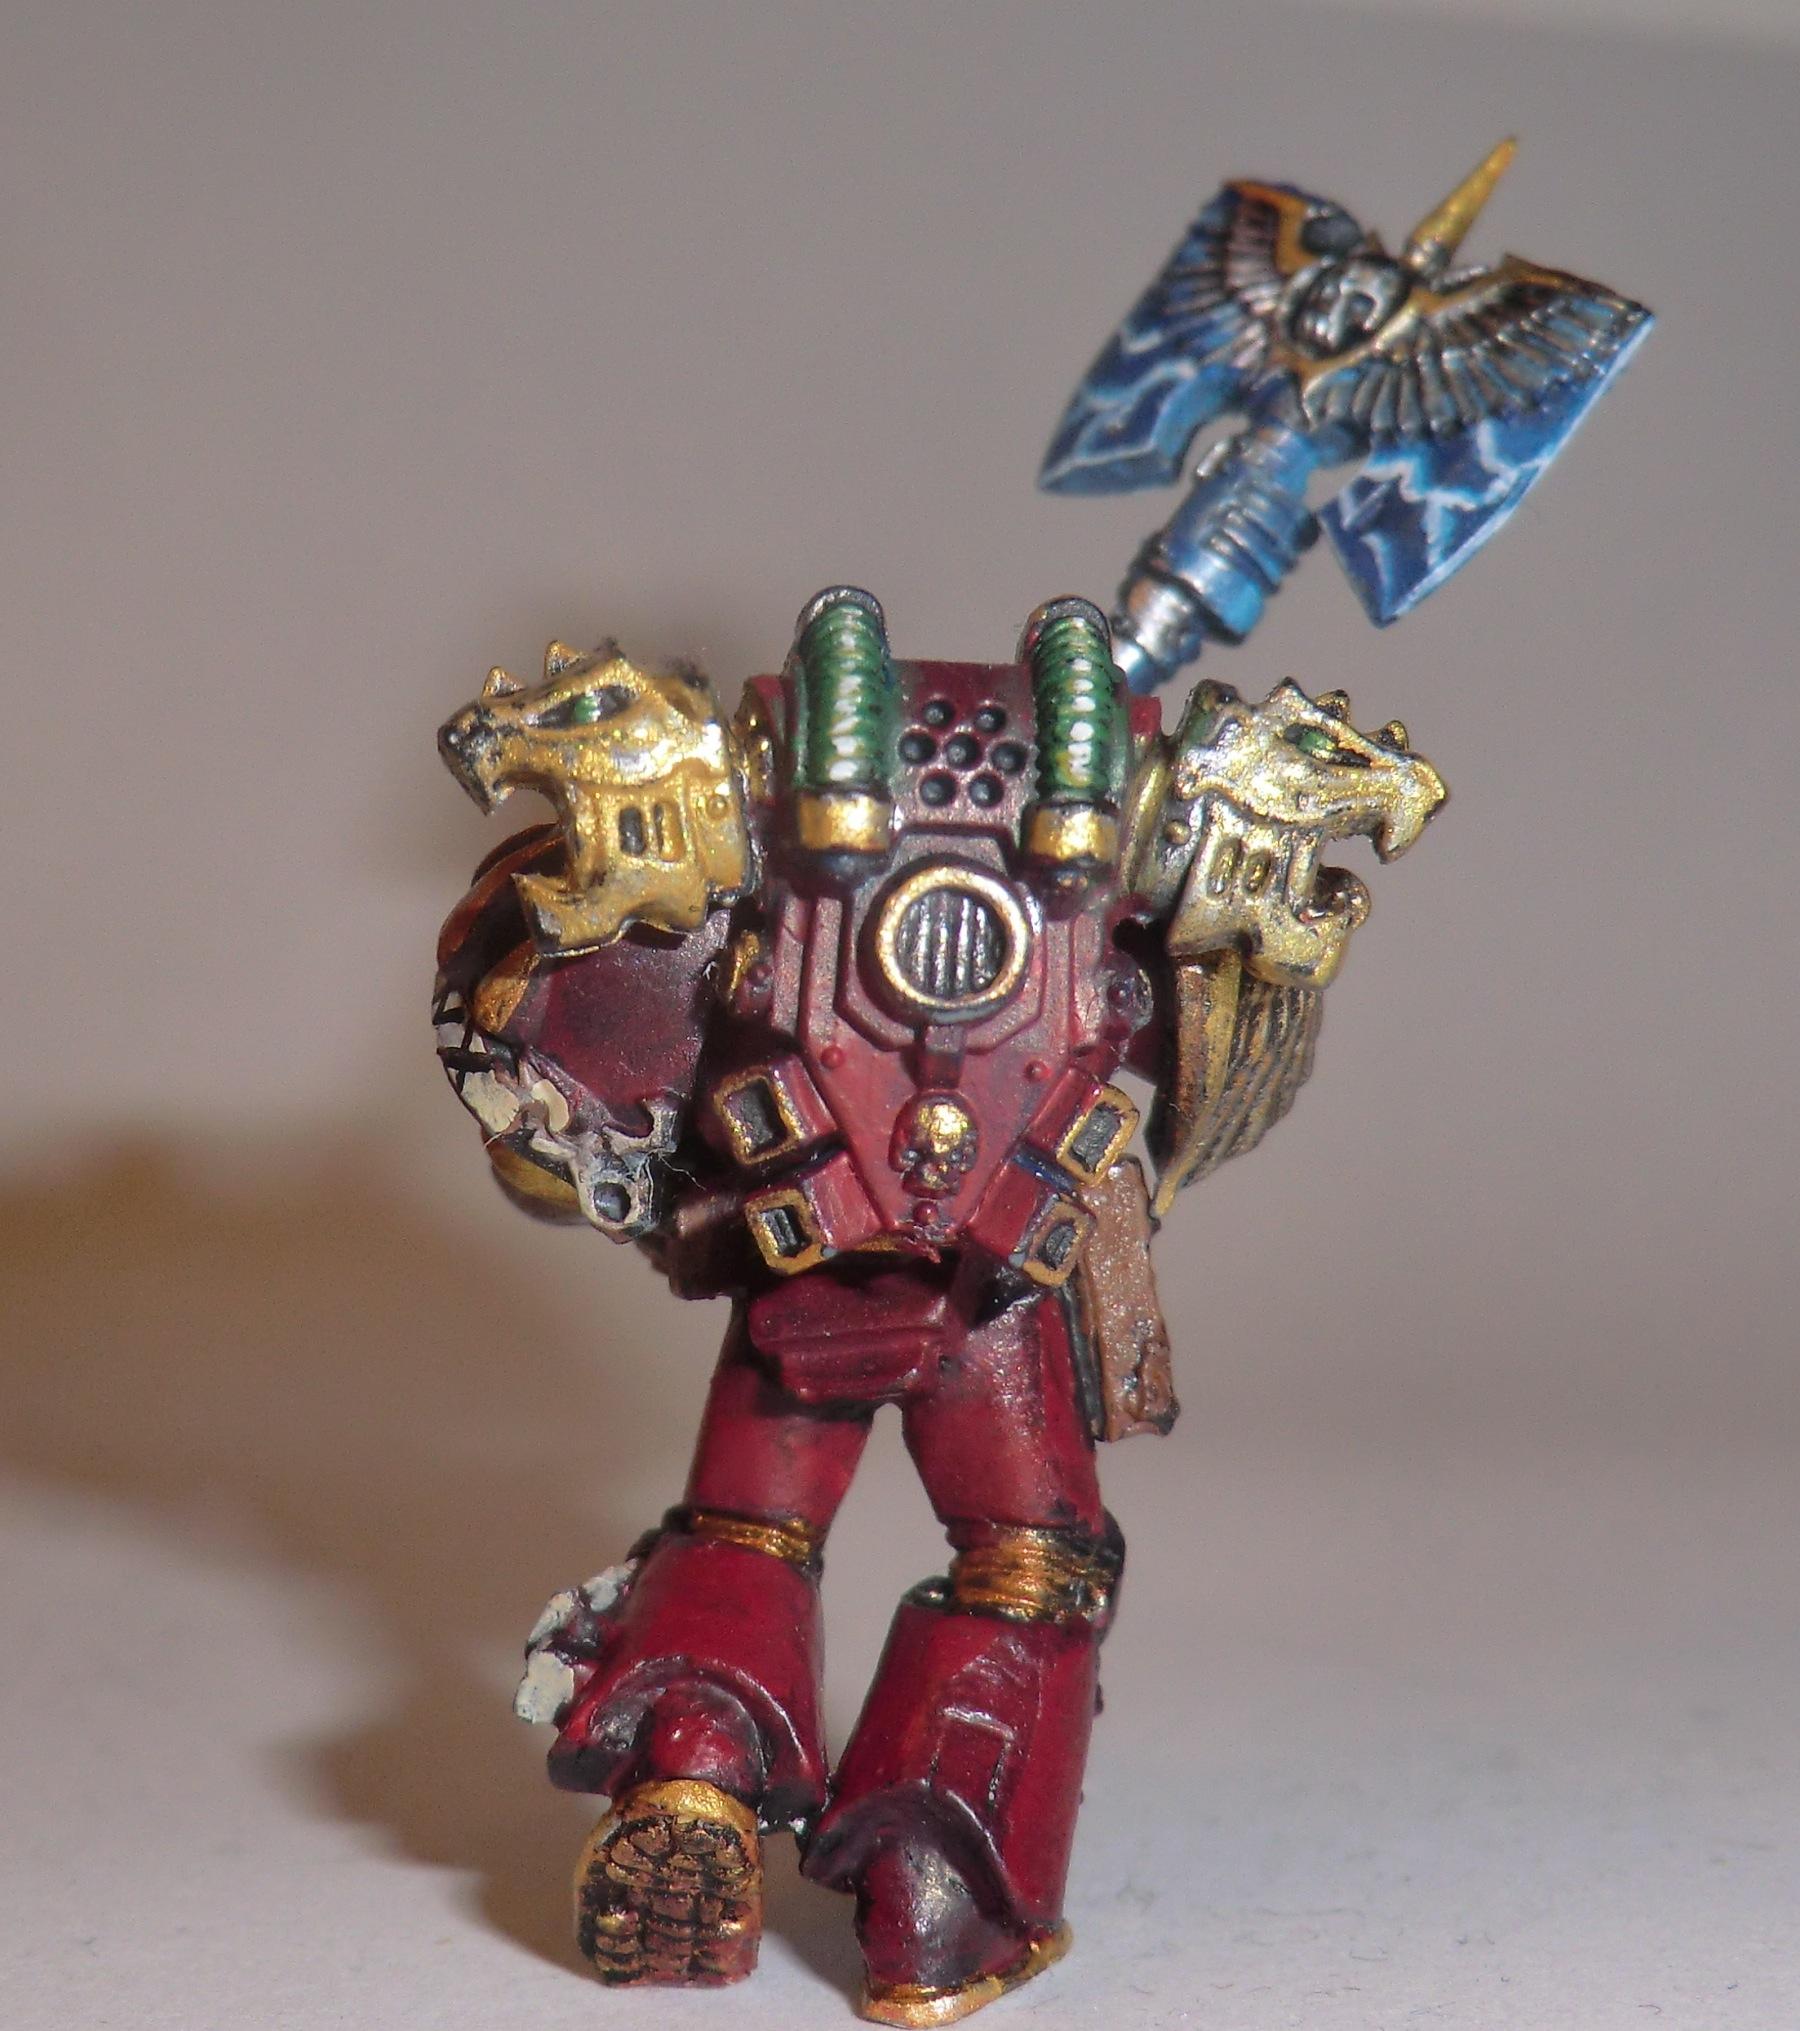 Captain, Object Source Lighting, Space Marines, Warhammer 40,000